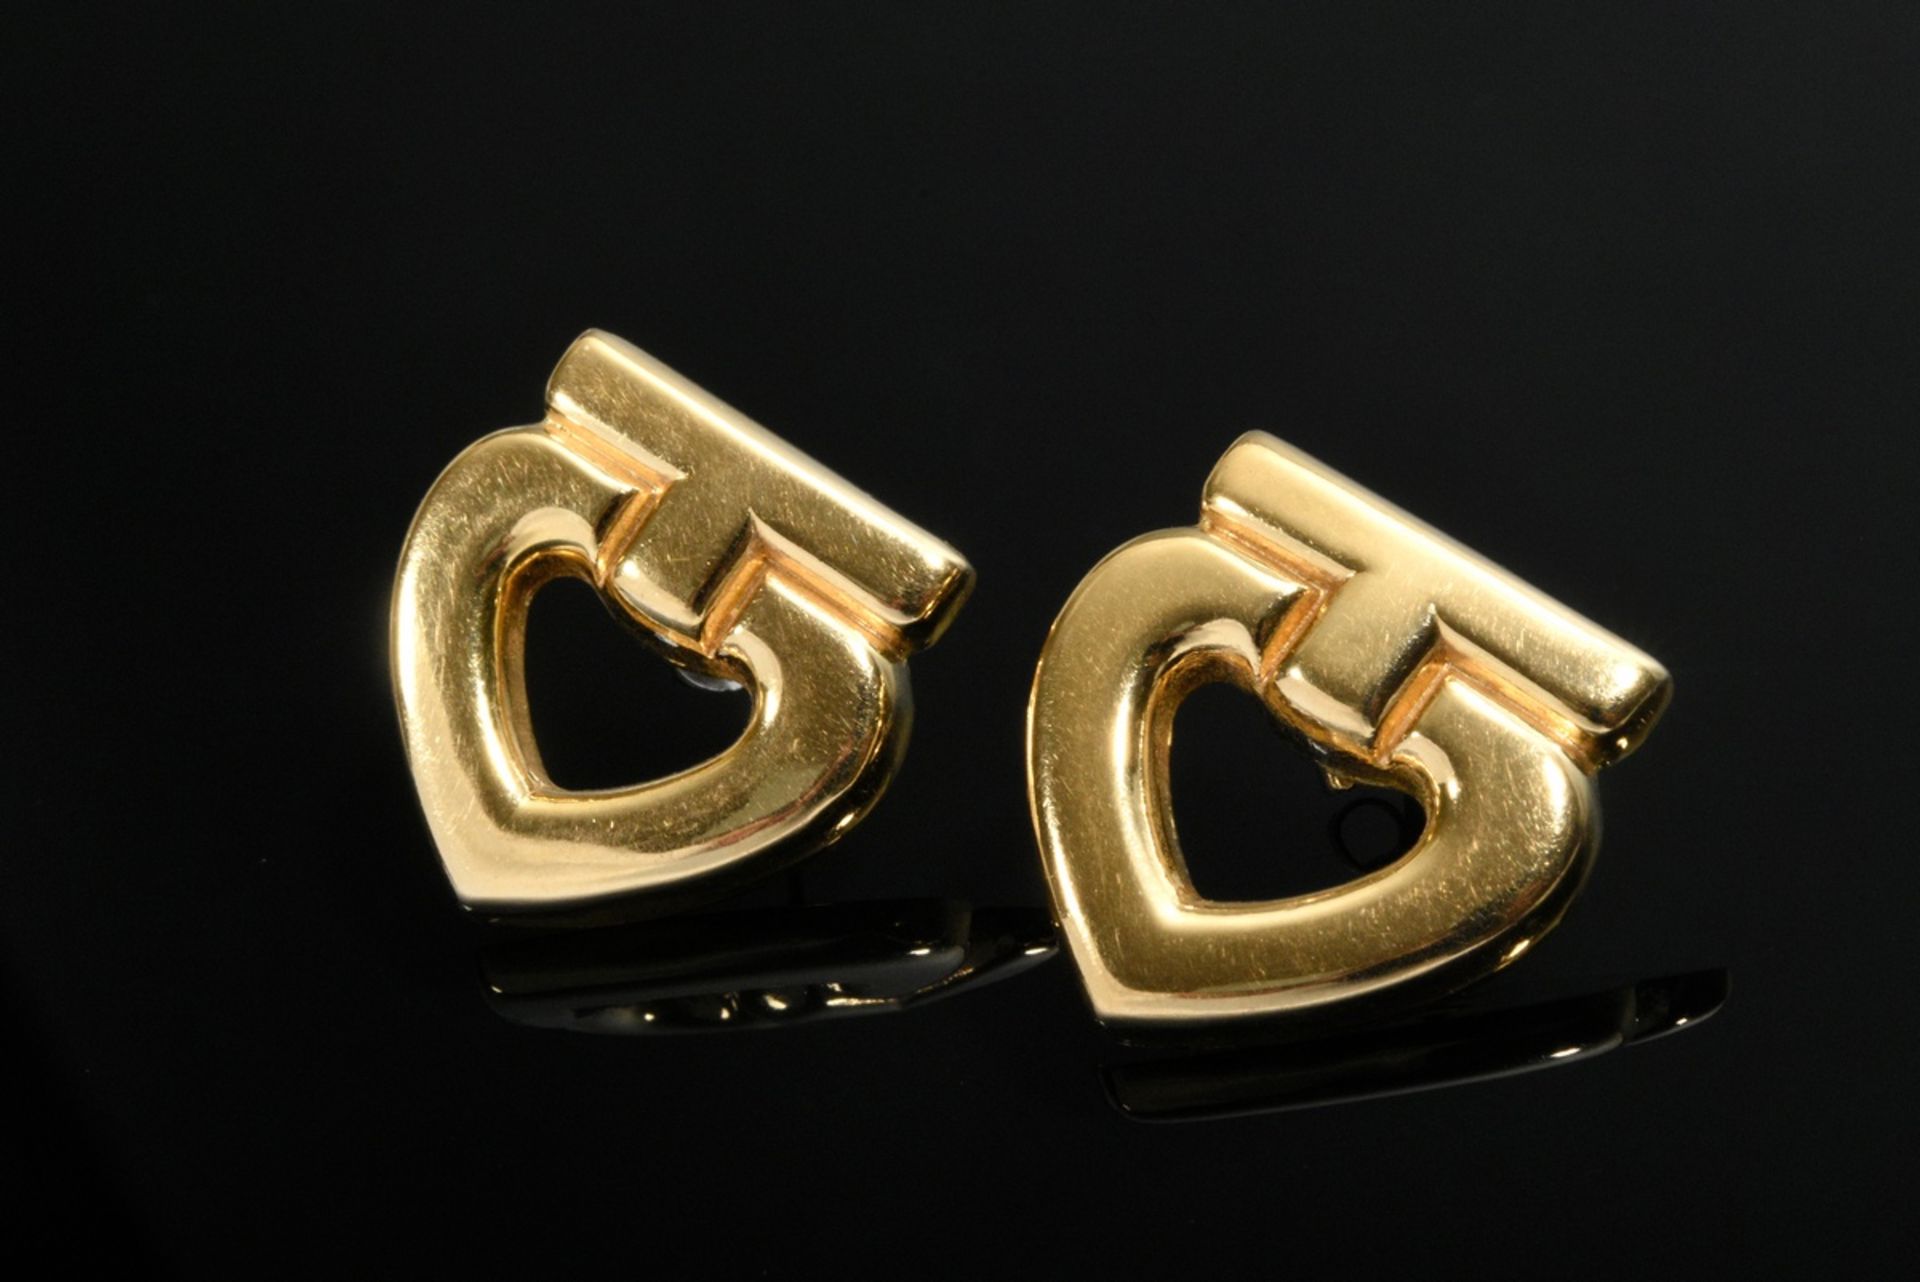 Pair of yellow gold 750 ear studs in heart shape, 7g, Ø 2.3x2.3cm, 1 stopper white gold 585